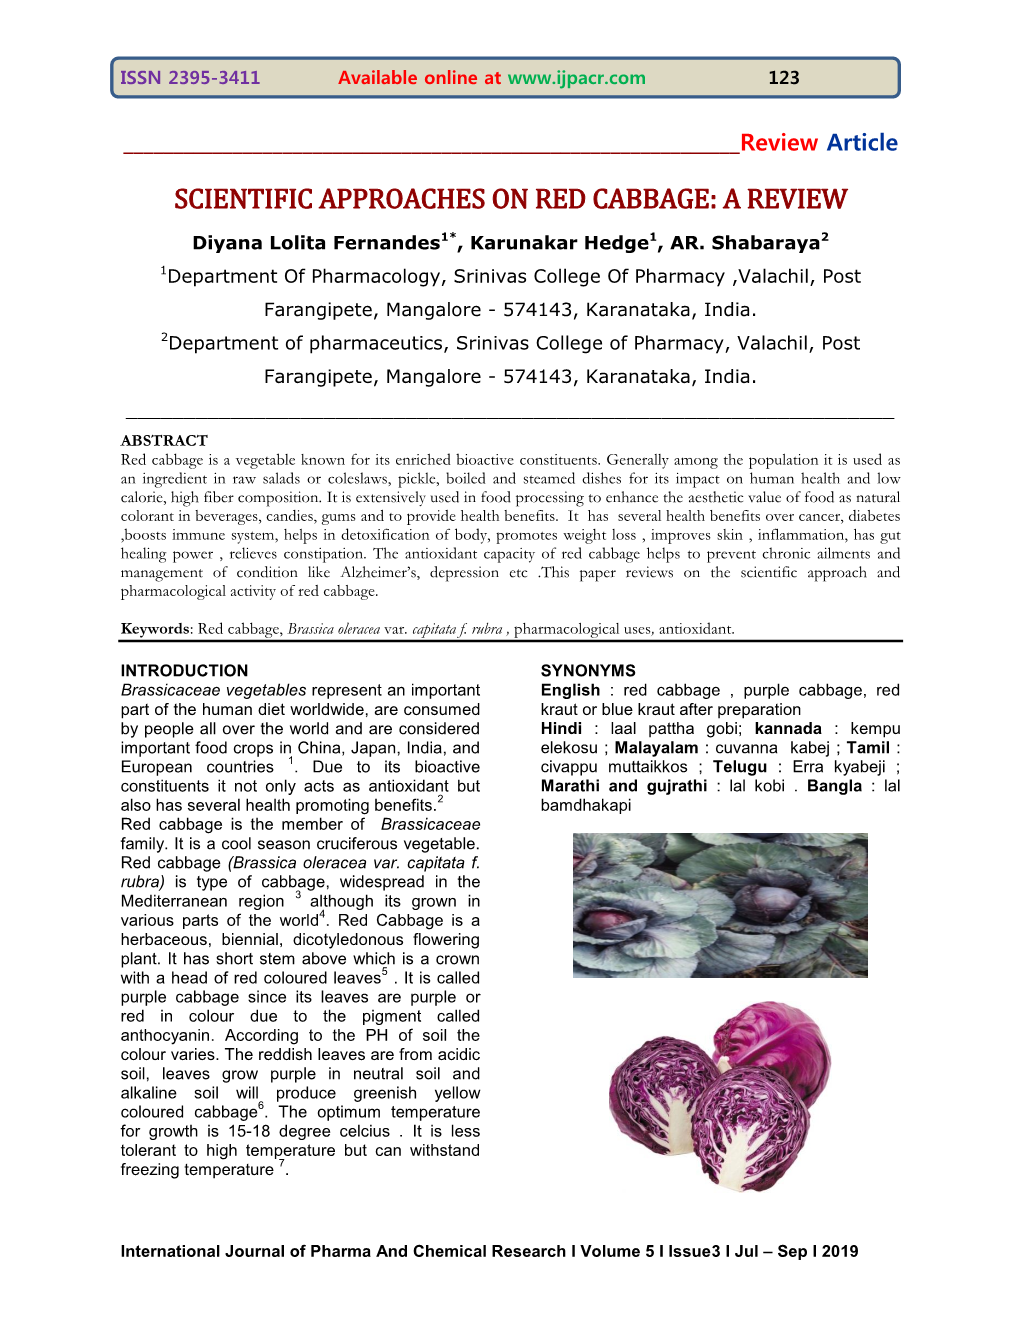 Scientific Approaches on Red Cabbage: a Review